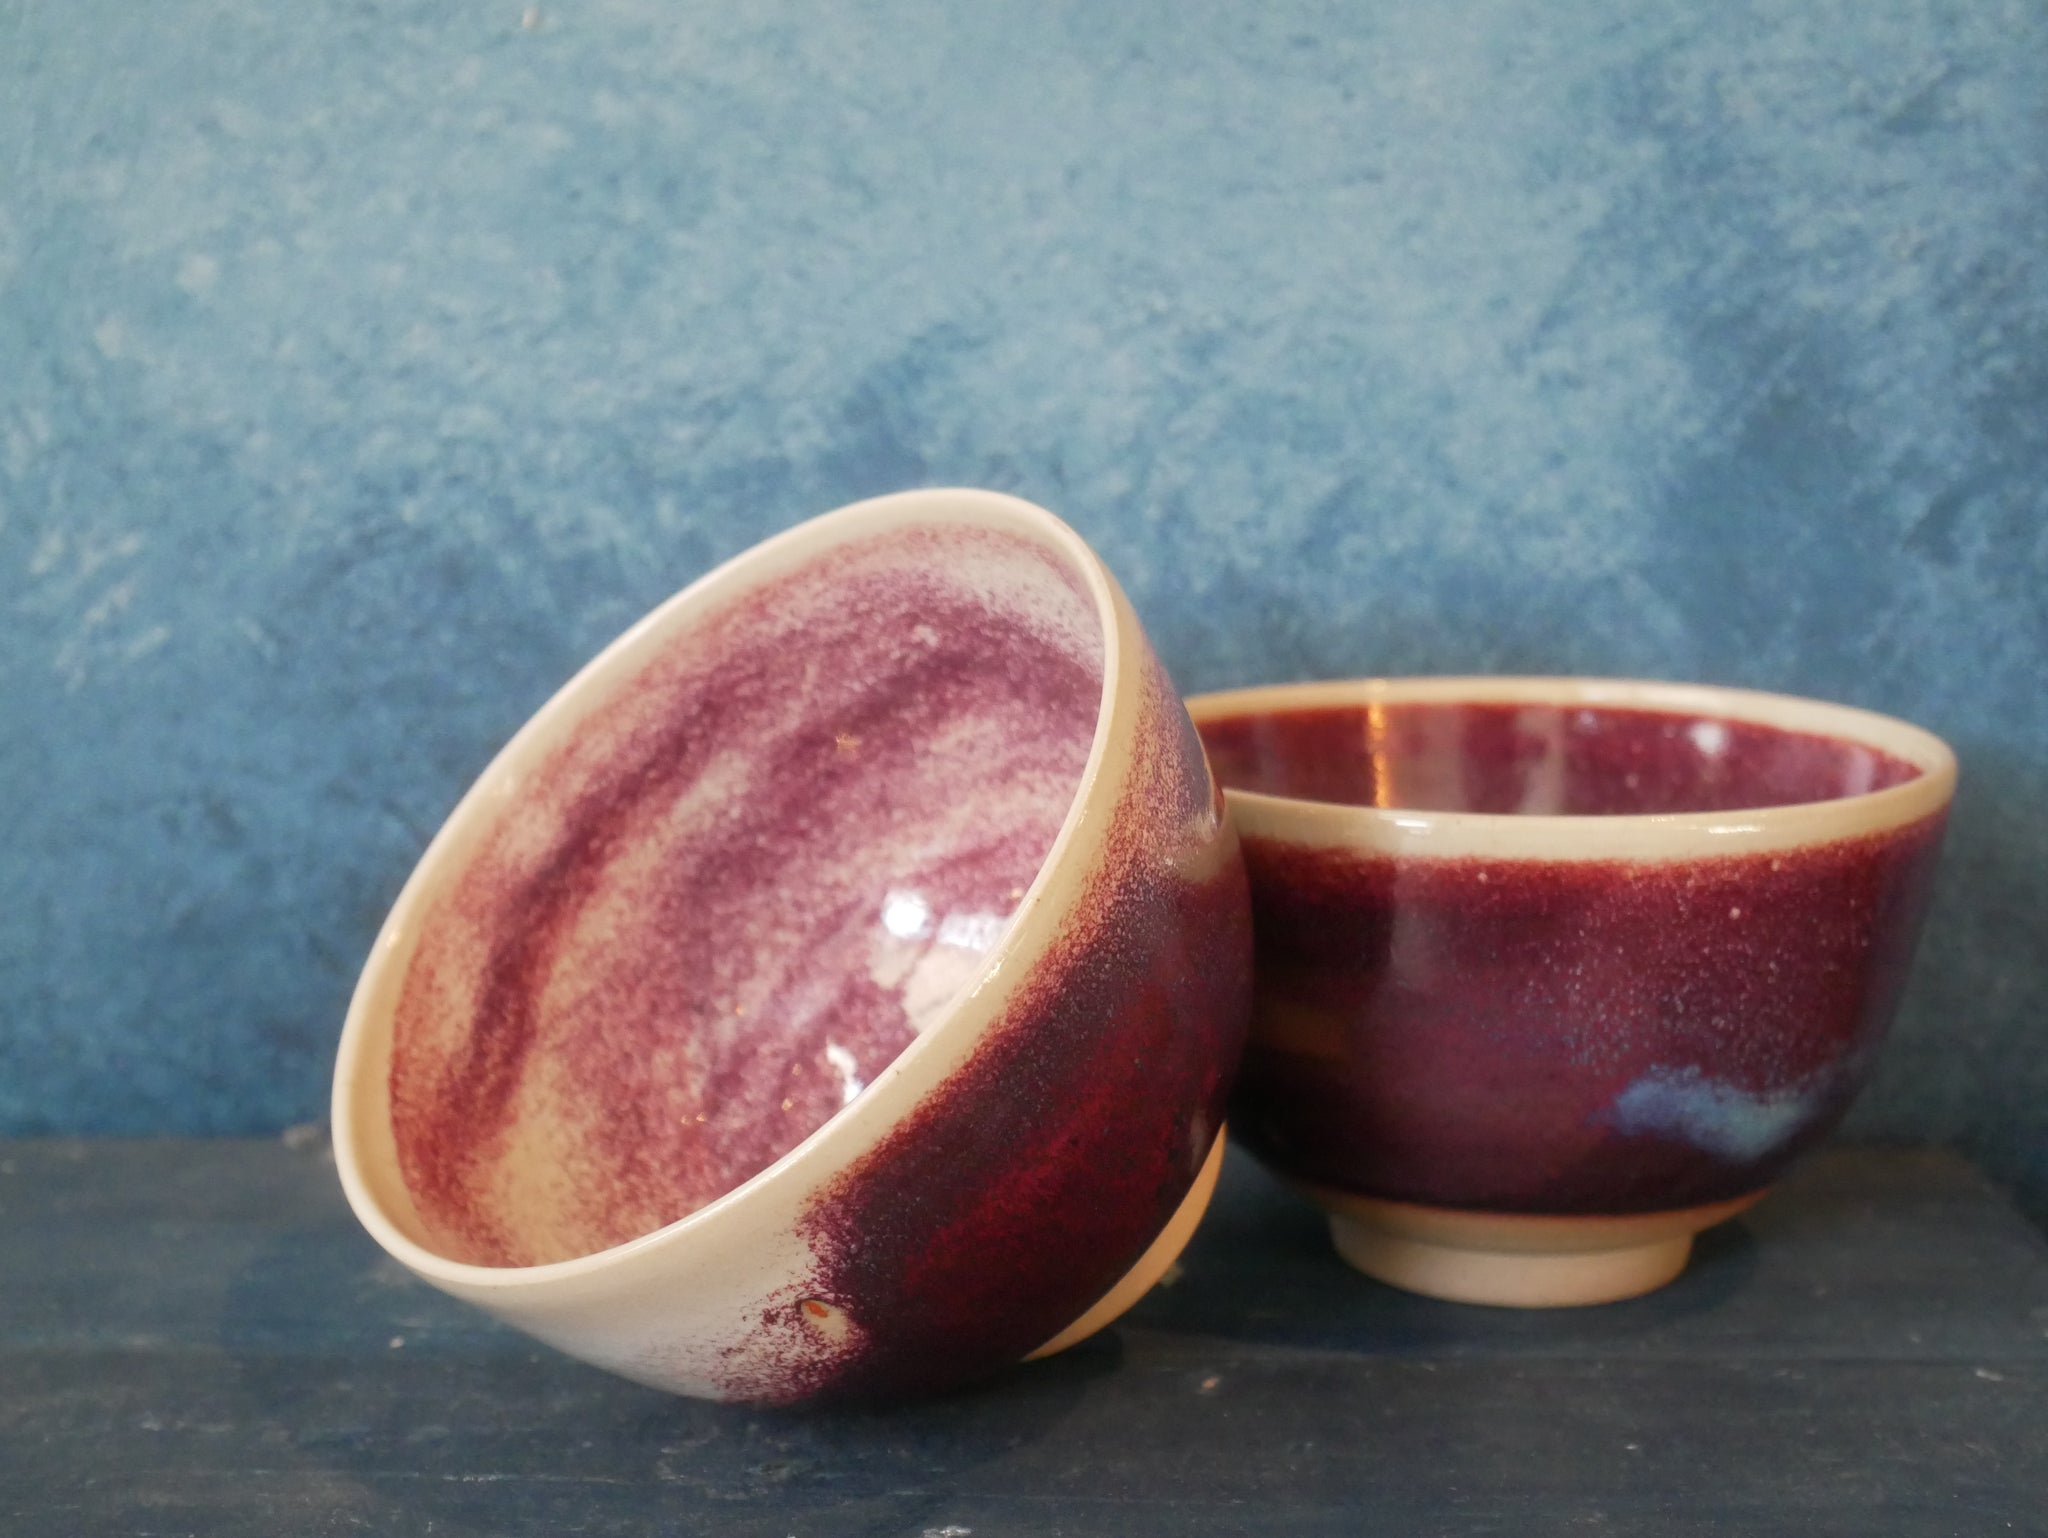 Red Copper Waterfall Small bowl